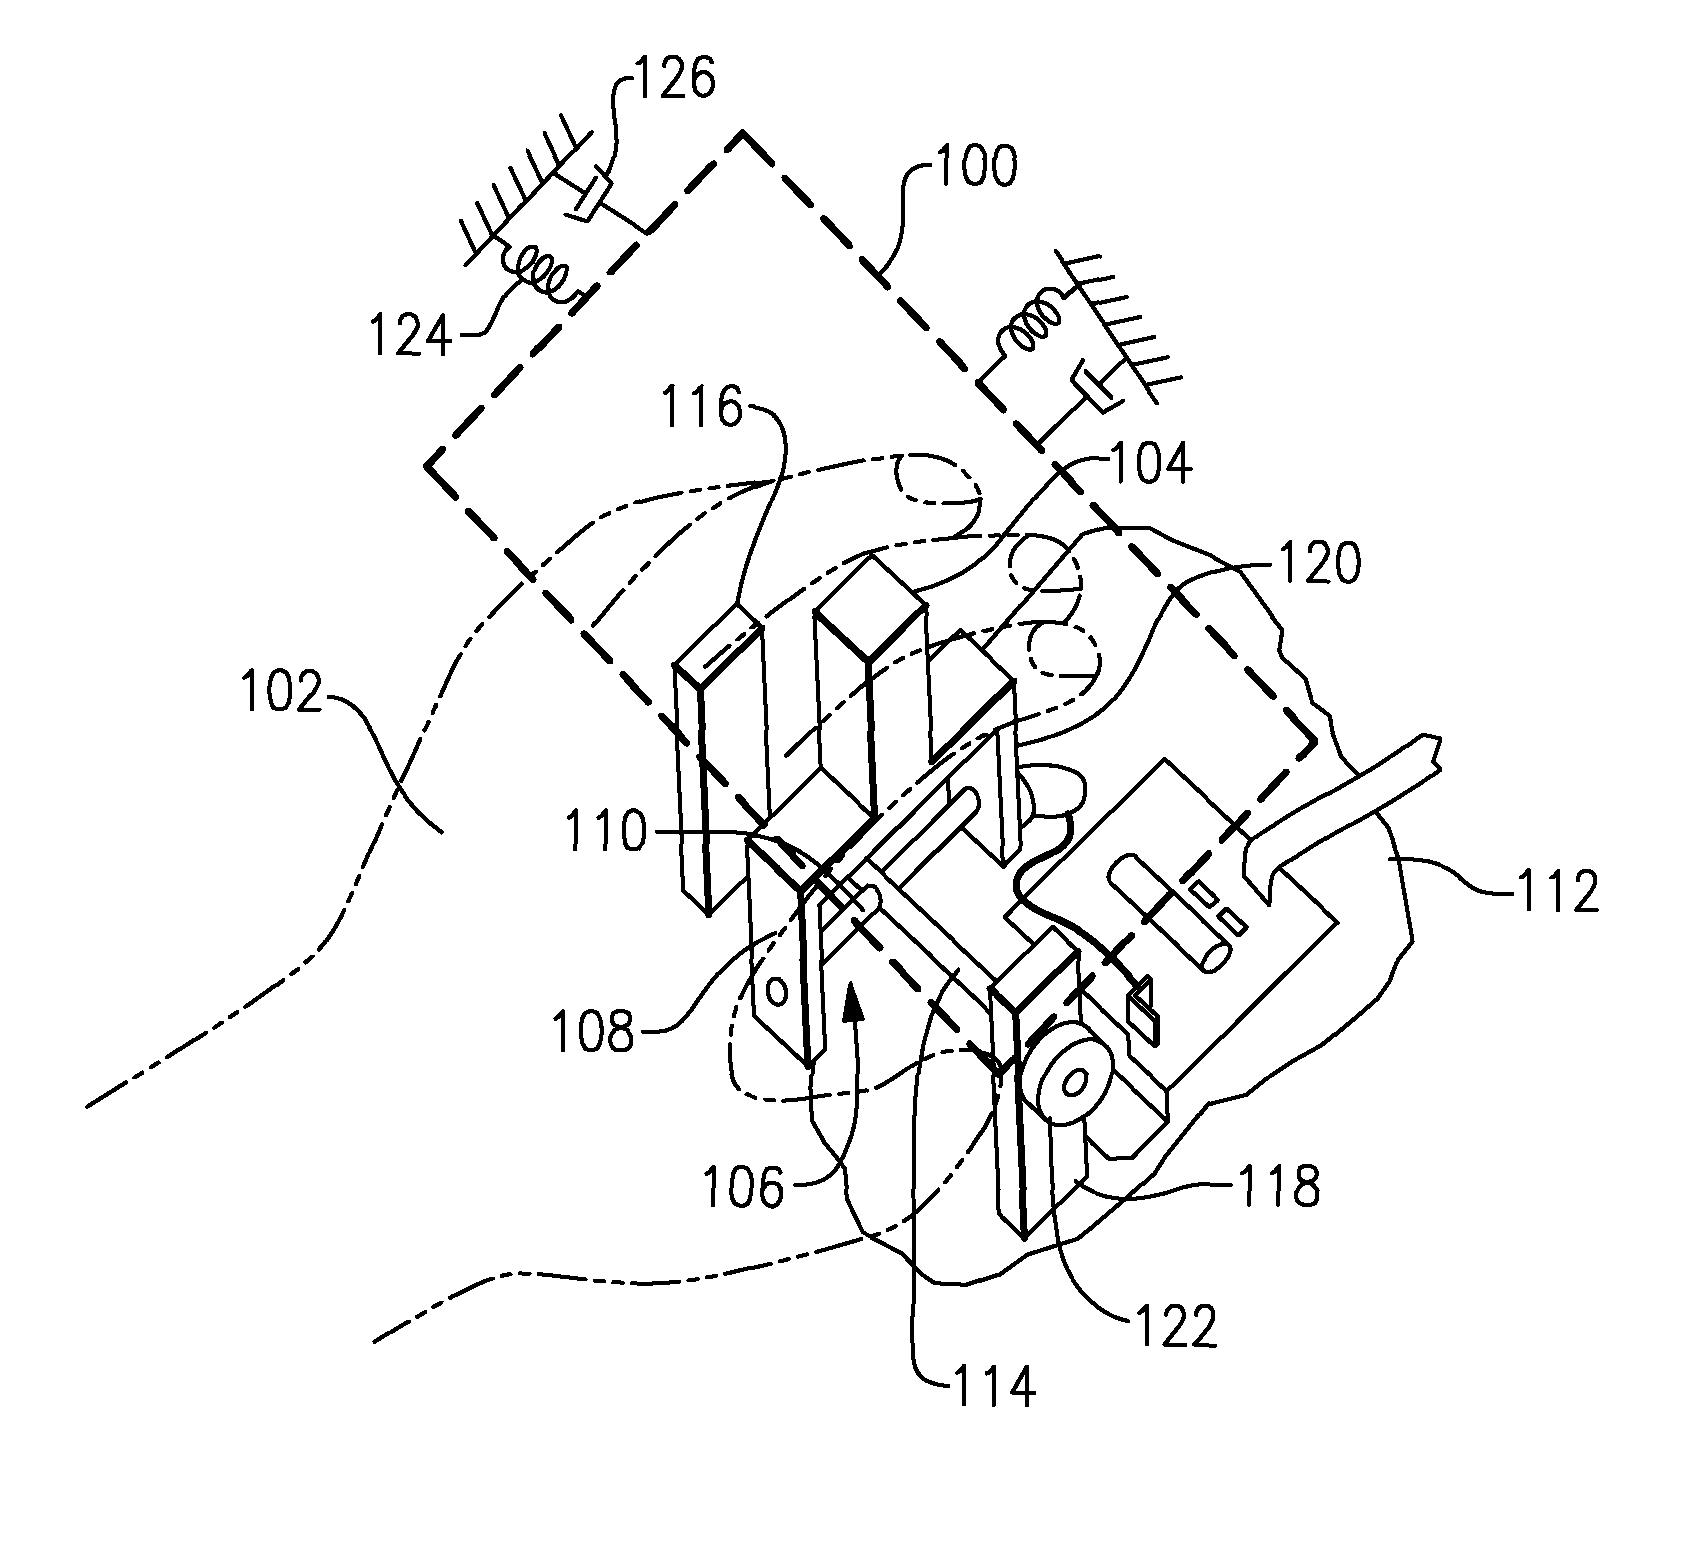 Hand activated input device with horizontal control surface